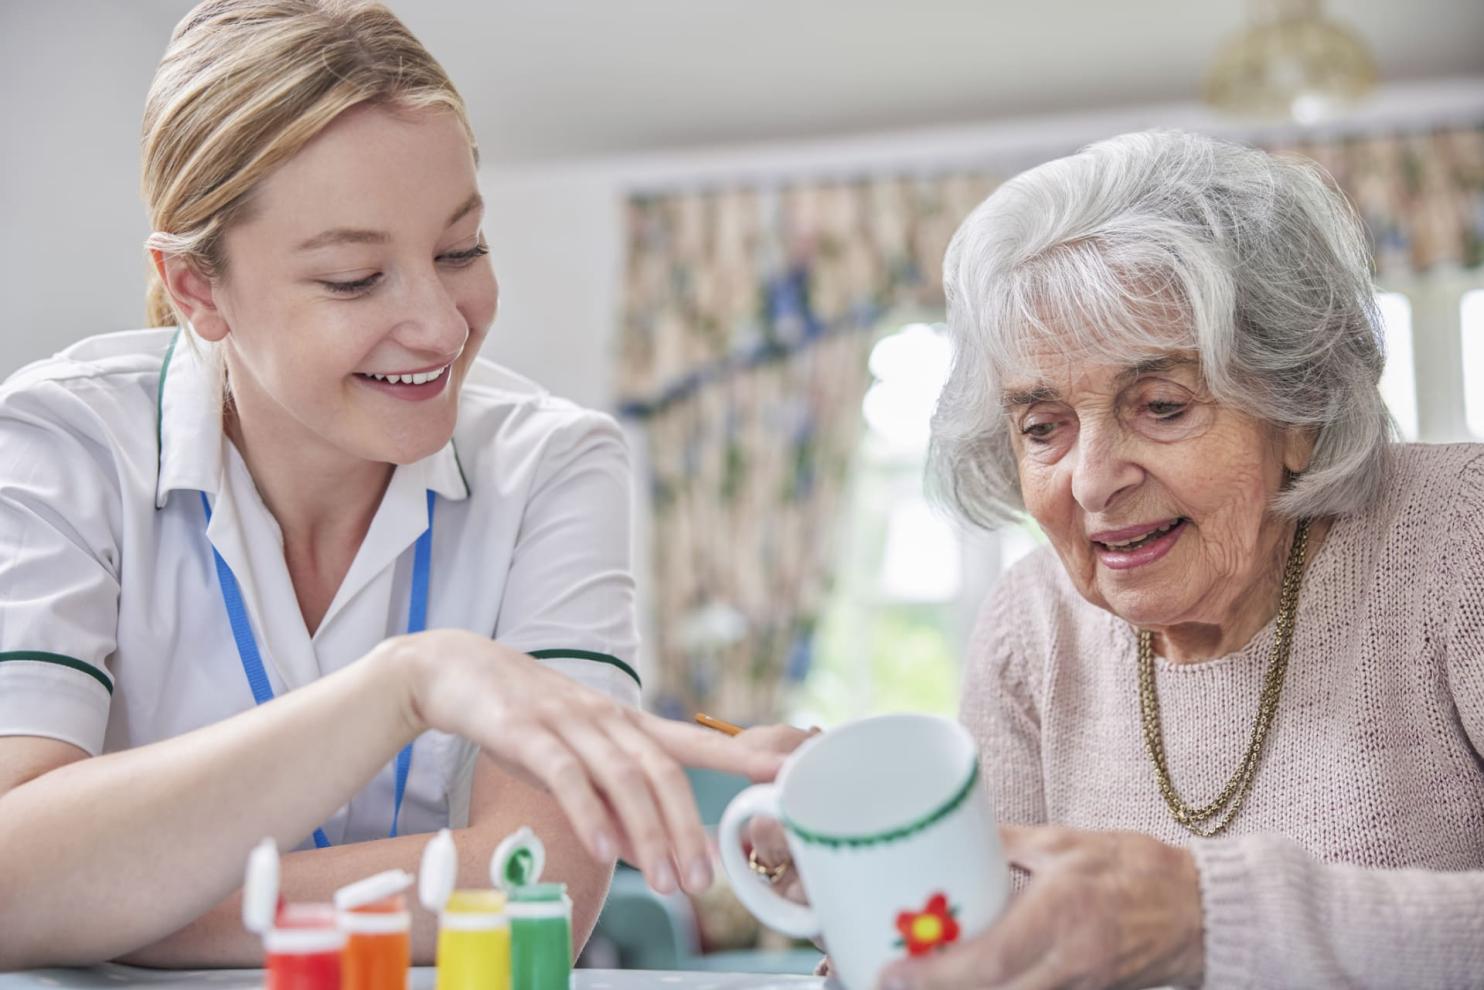 What Are the Different Settings in Which Occupational Therapy is Provided in Medical Rehab Facilities?